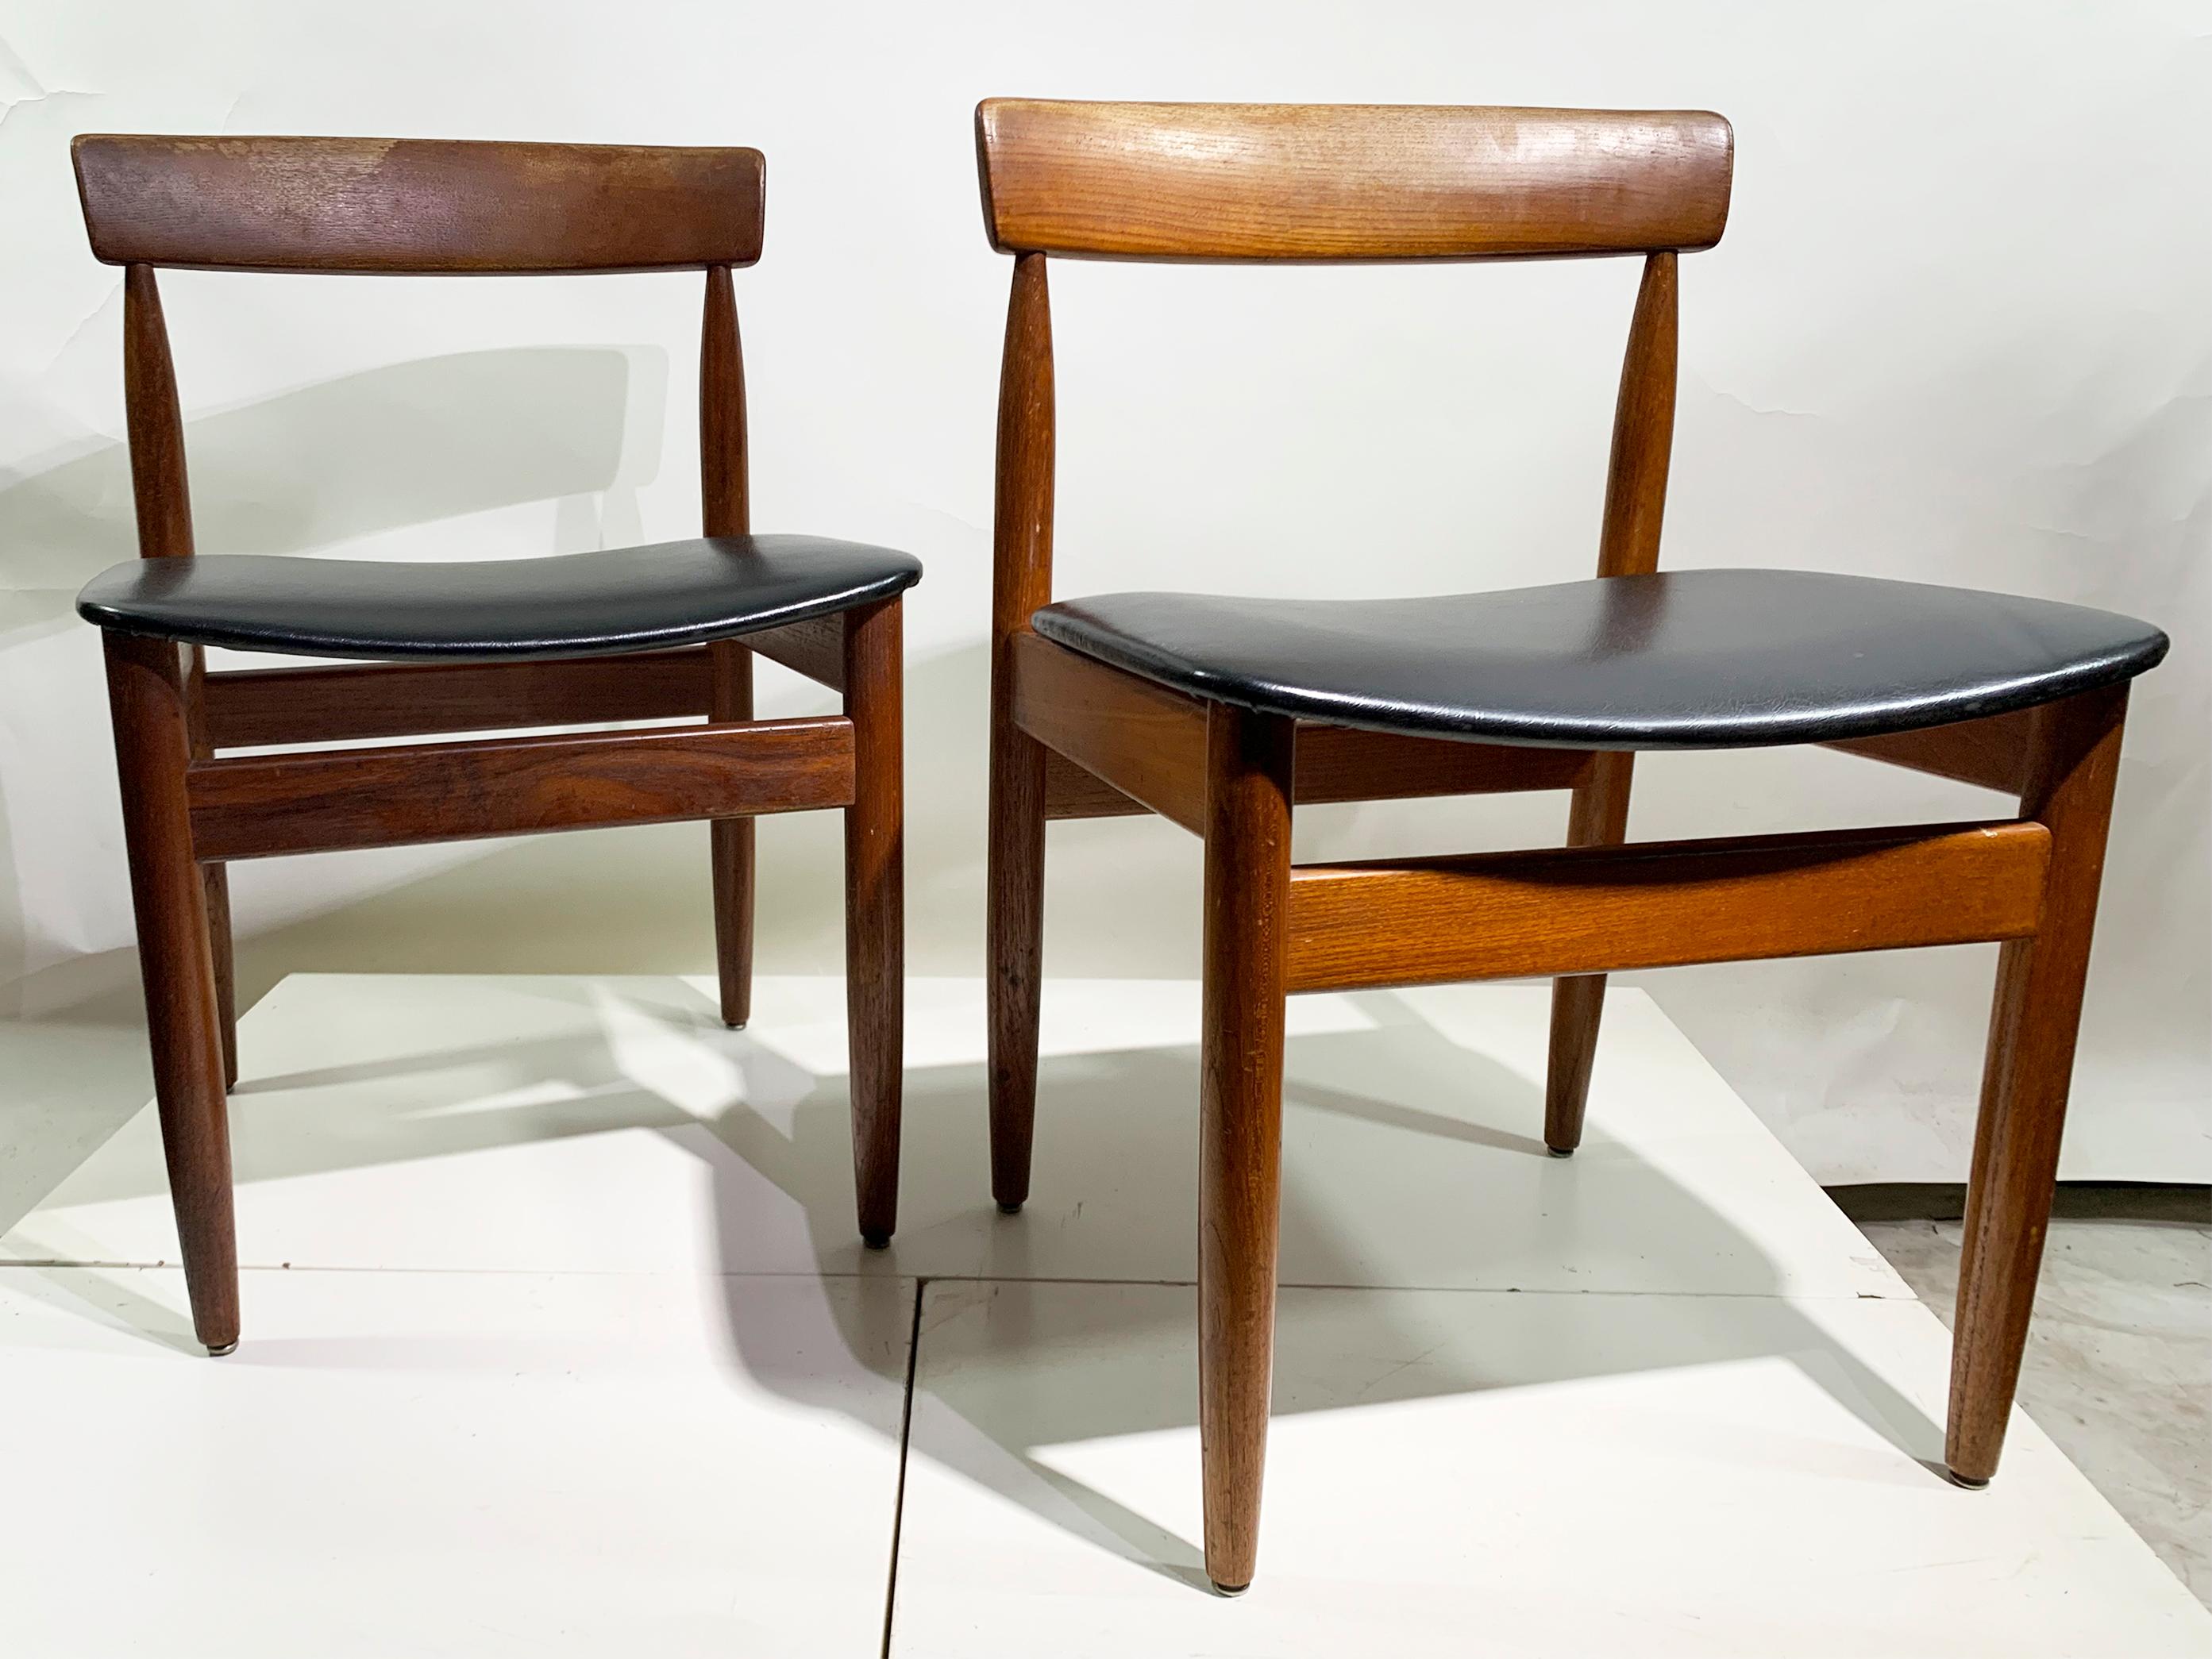 Exemplifying the essence of mid-century modern design, these Scandinavian dining chairs showcase meticulous craftsmanship. Each chair features a gracefully curved solid paddle backrest paired with sculptural supporting legs, creating a harmonious